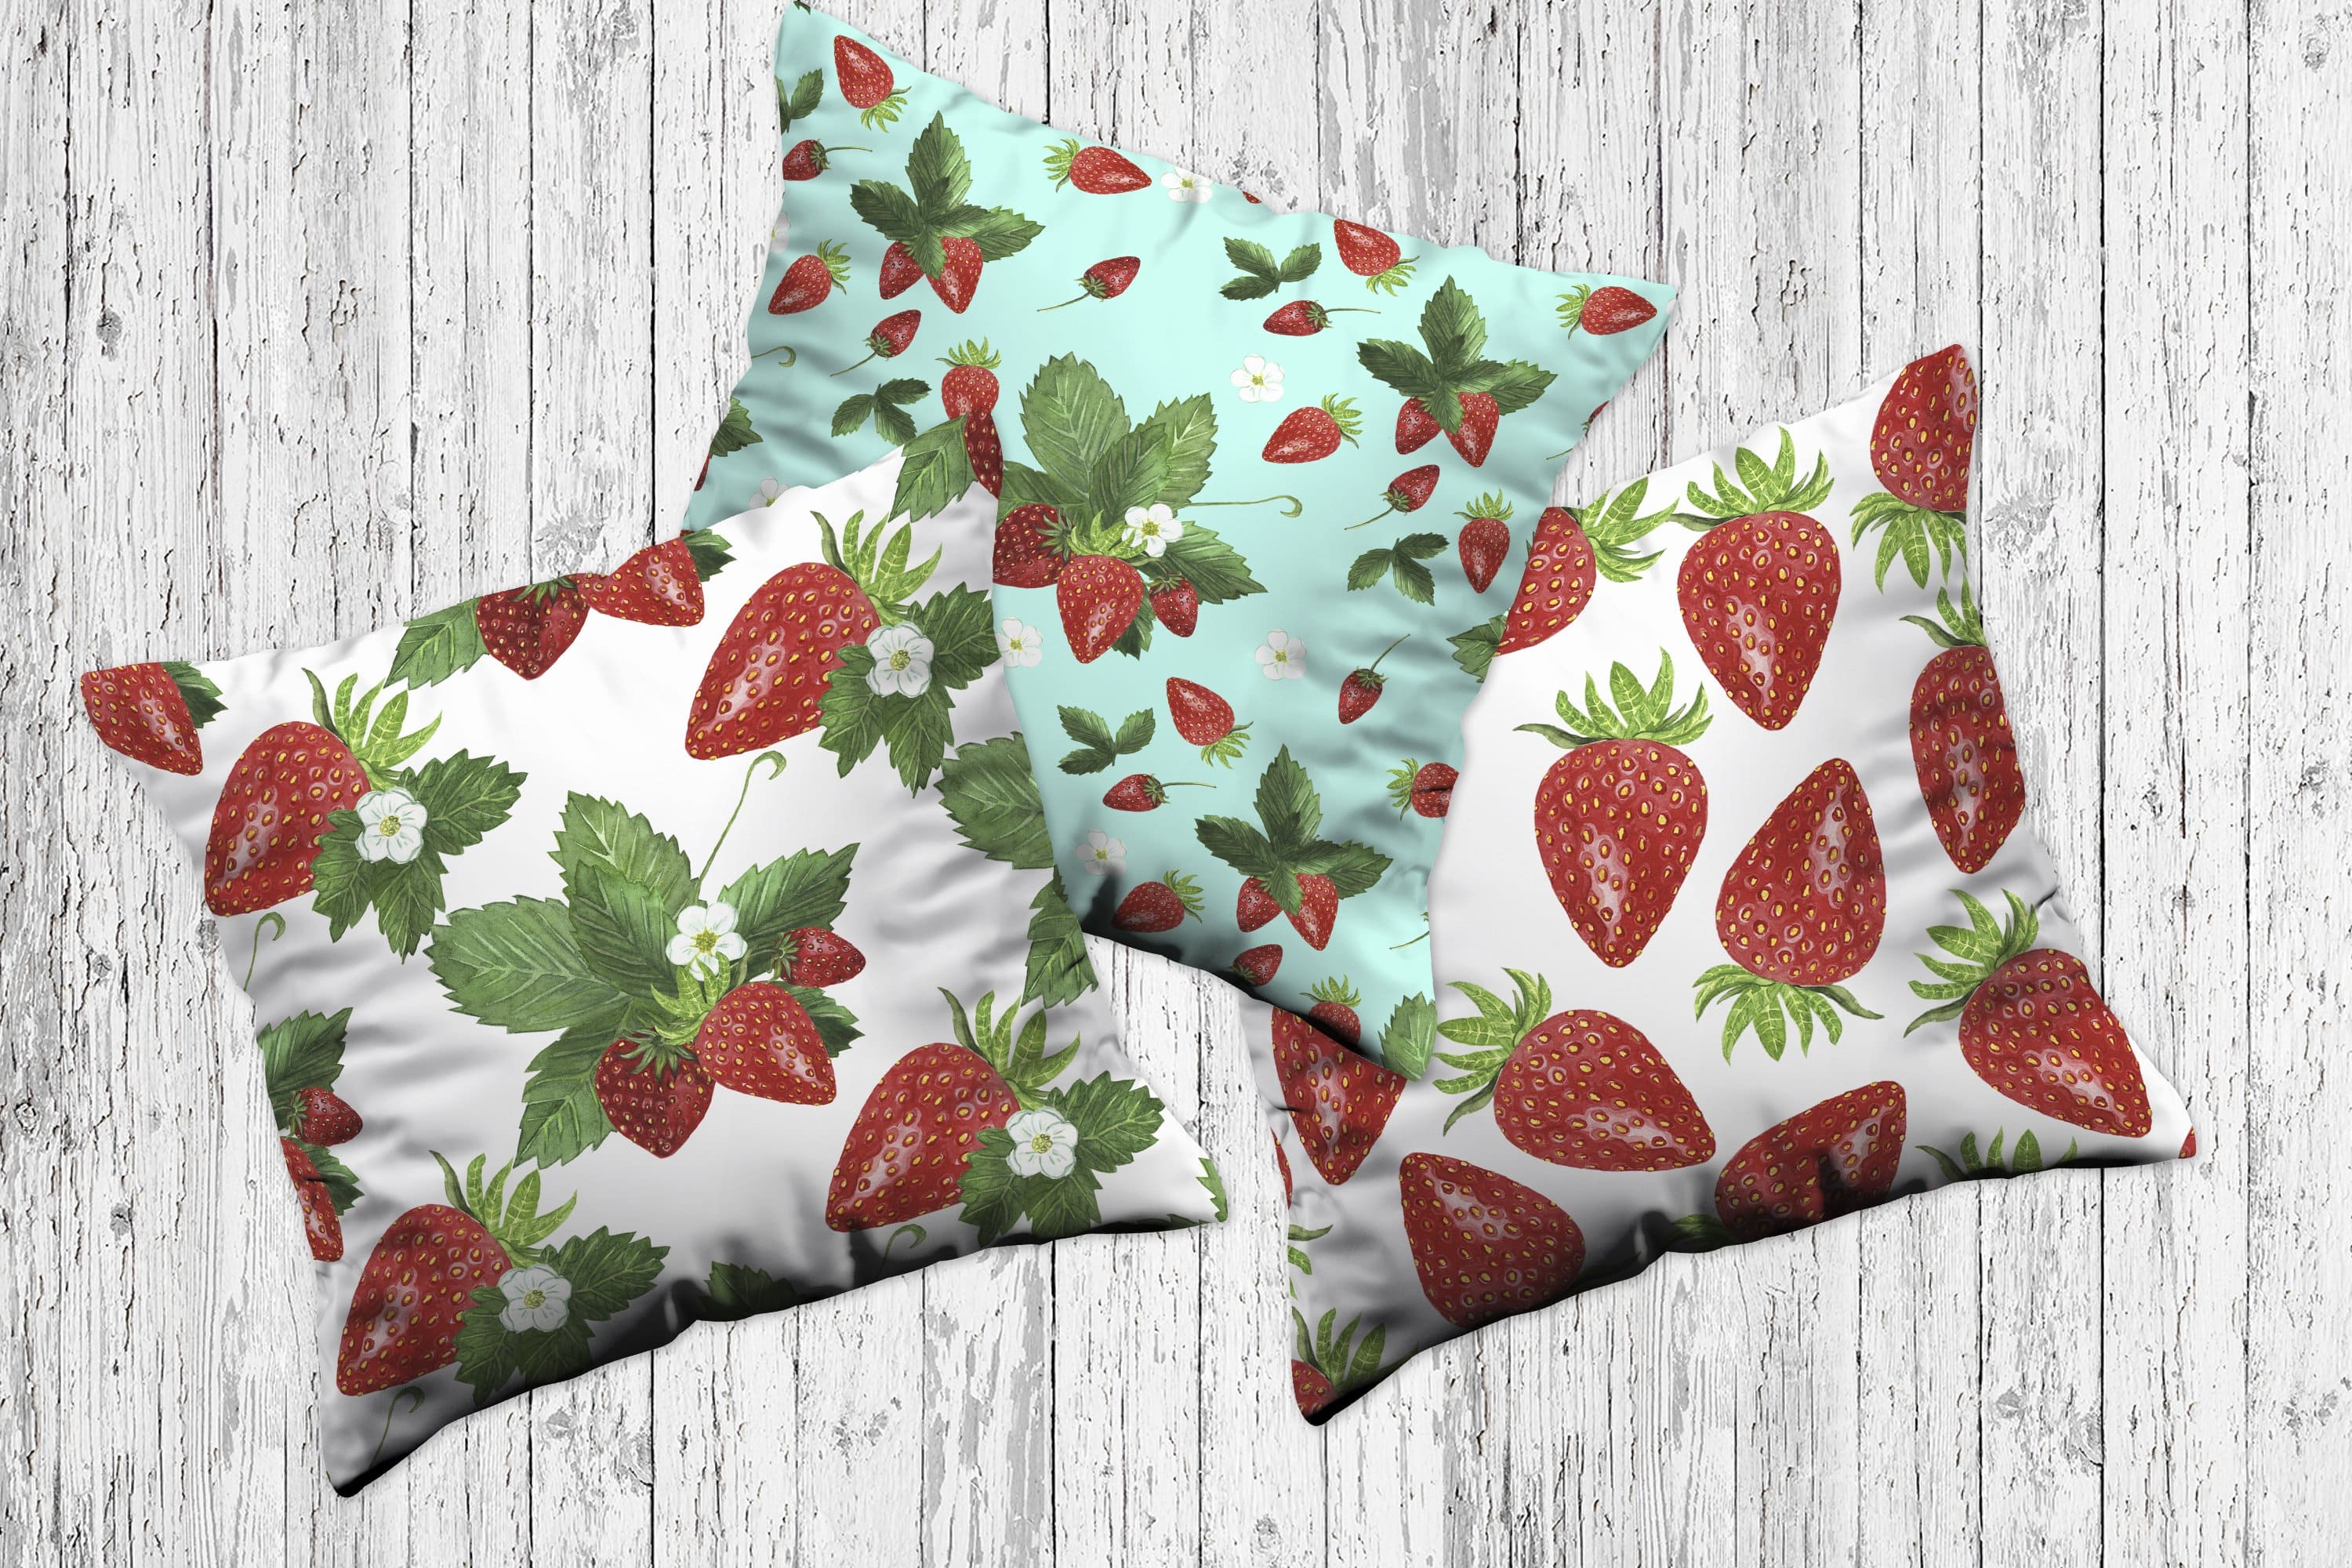 Three pillows with a strawberry design.